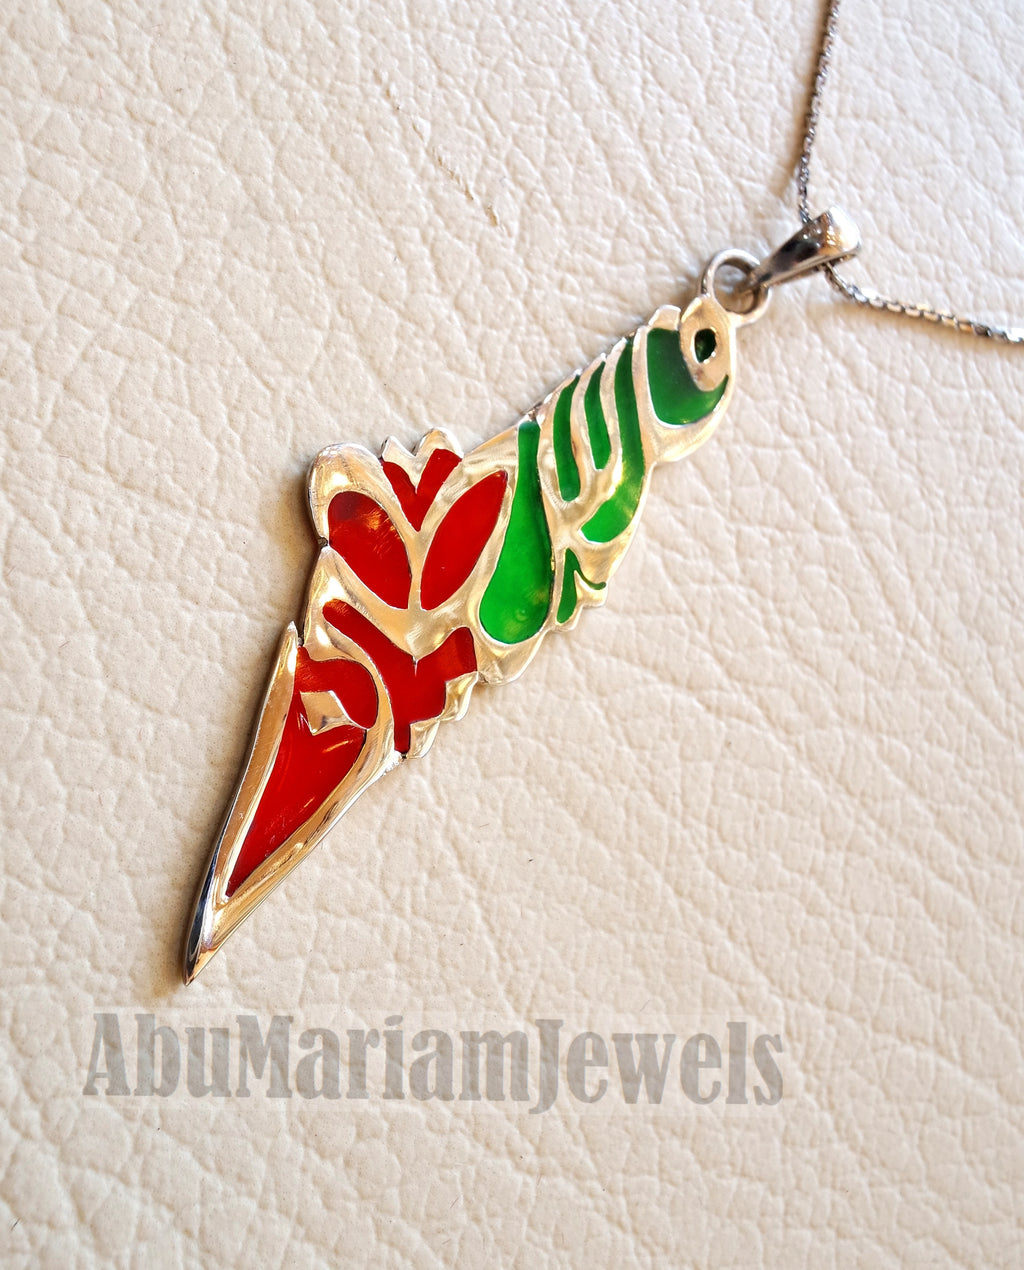 Palestine map pendant sterling silver 925 high quality jewelry arabic calligraphy colorful green and red enamel fast shipping خارطه فلسطين